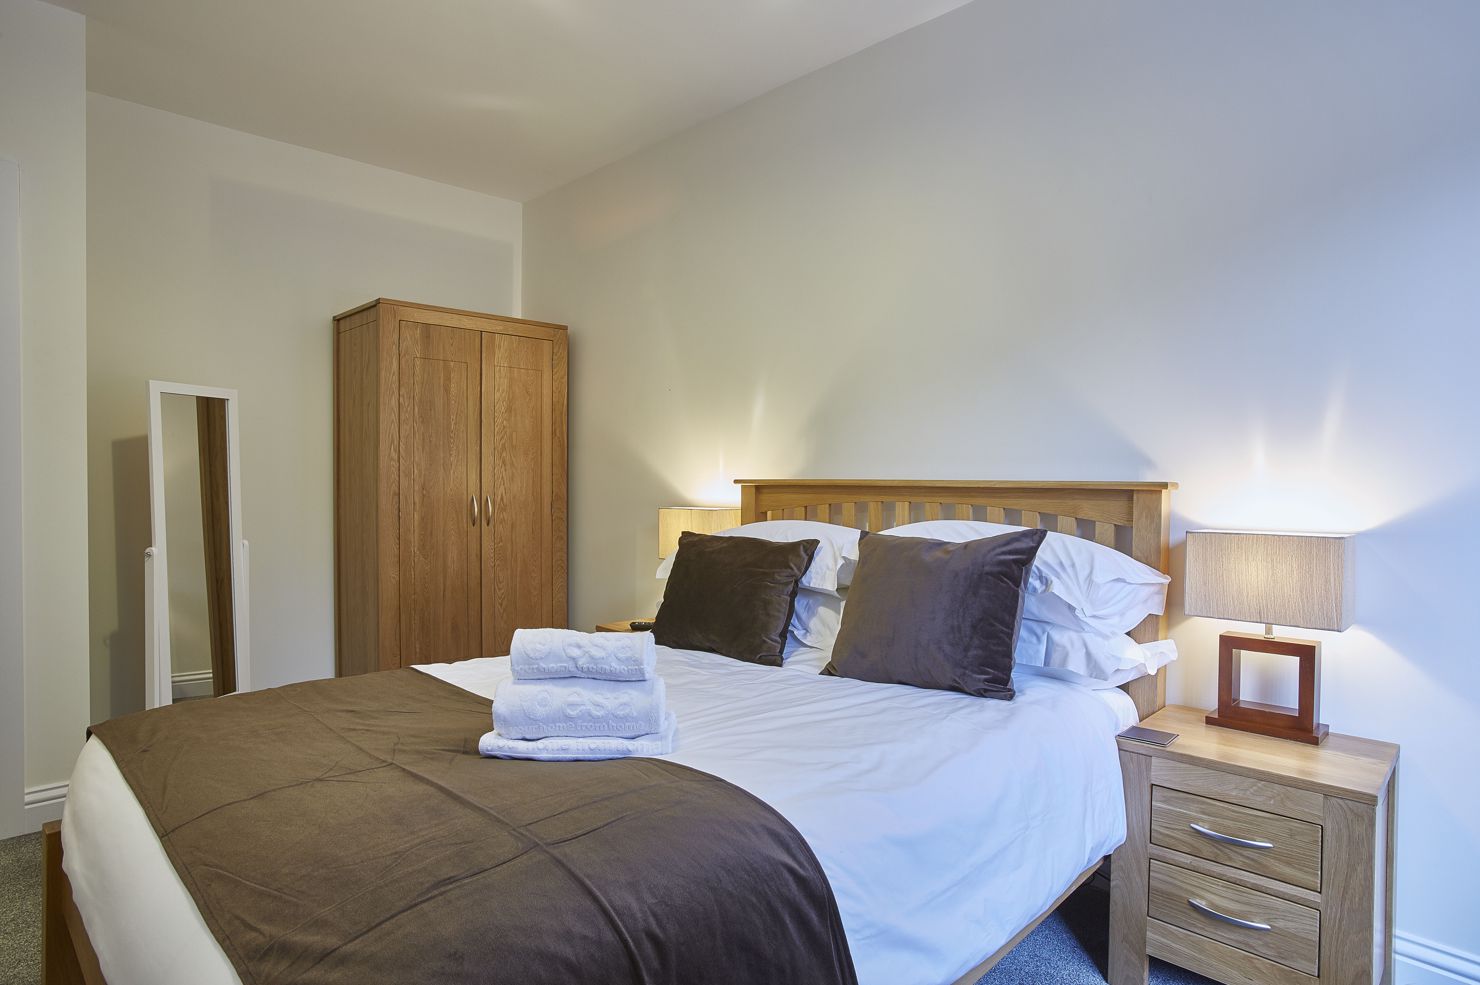 Guild-House-Self-Catering-Apartments-Swindon---Short-Stay-Accommodation-Swindon-UK-|-Urban-Stay